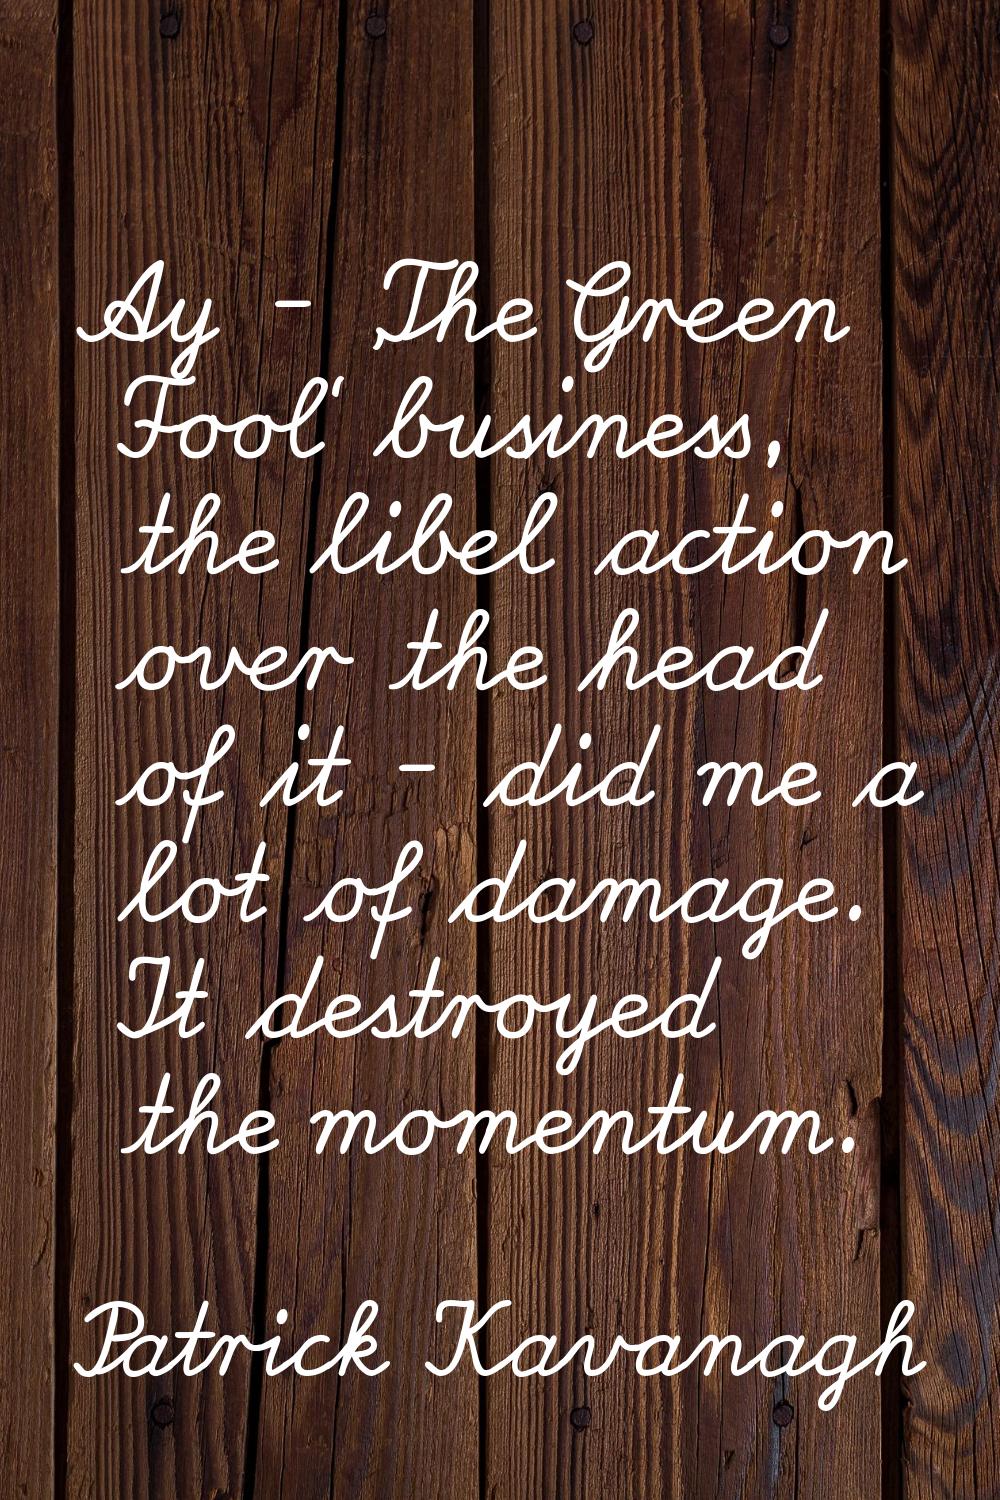 Ay - 'The Green Fool' business, the libel action over the head of it - did me a lot of damage. It d